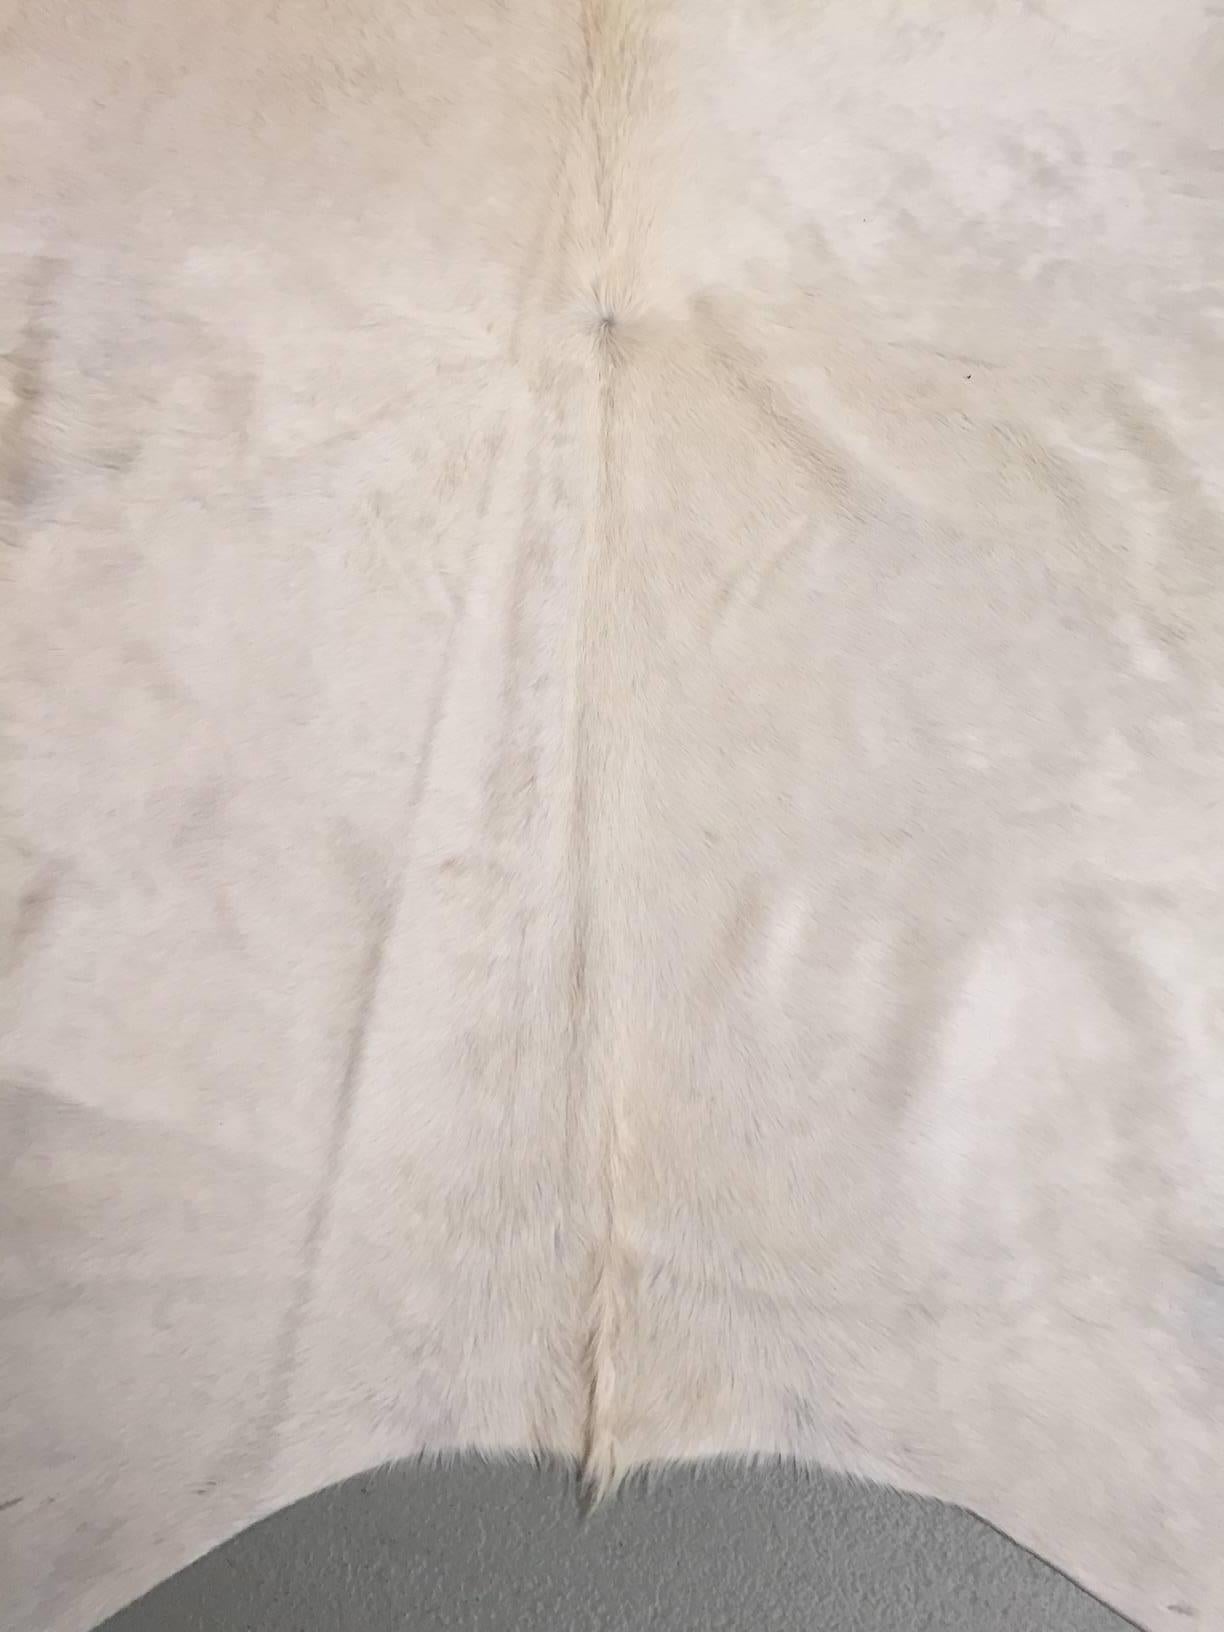 Cowhide from Argentina in a rare natural white color.
This hide has been hand-selected and meets our high standards of quality.
Excellent tanning makes this hide very soft and ideal to be used as a rug.
The hide has a luxurious appearence and